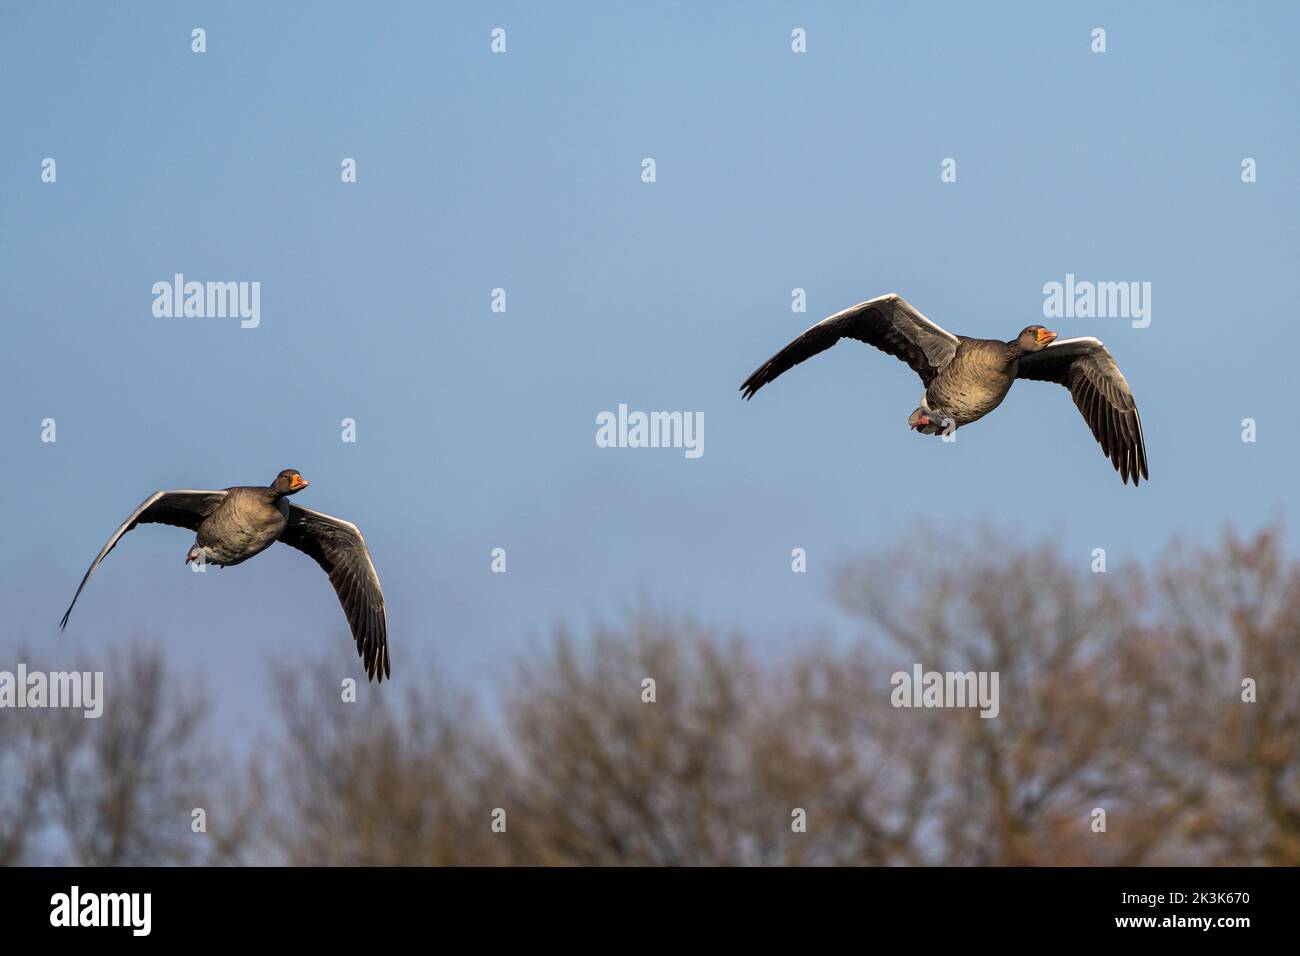 The greylag goose, Anser anser is a species of large goose in the waterfowl family Anatidae and the type species of the genus Anser. Here flying in th Stock Photo